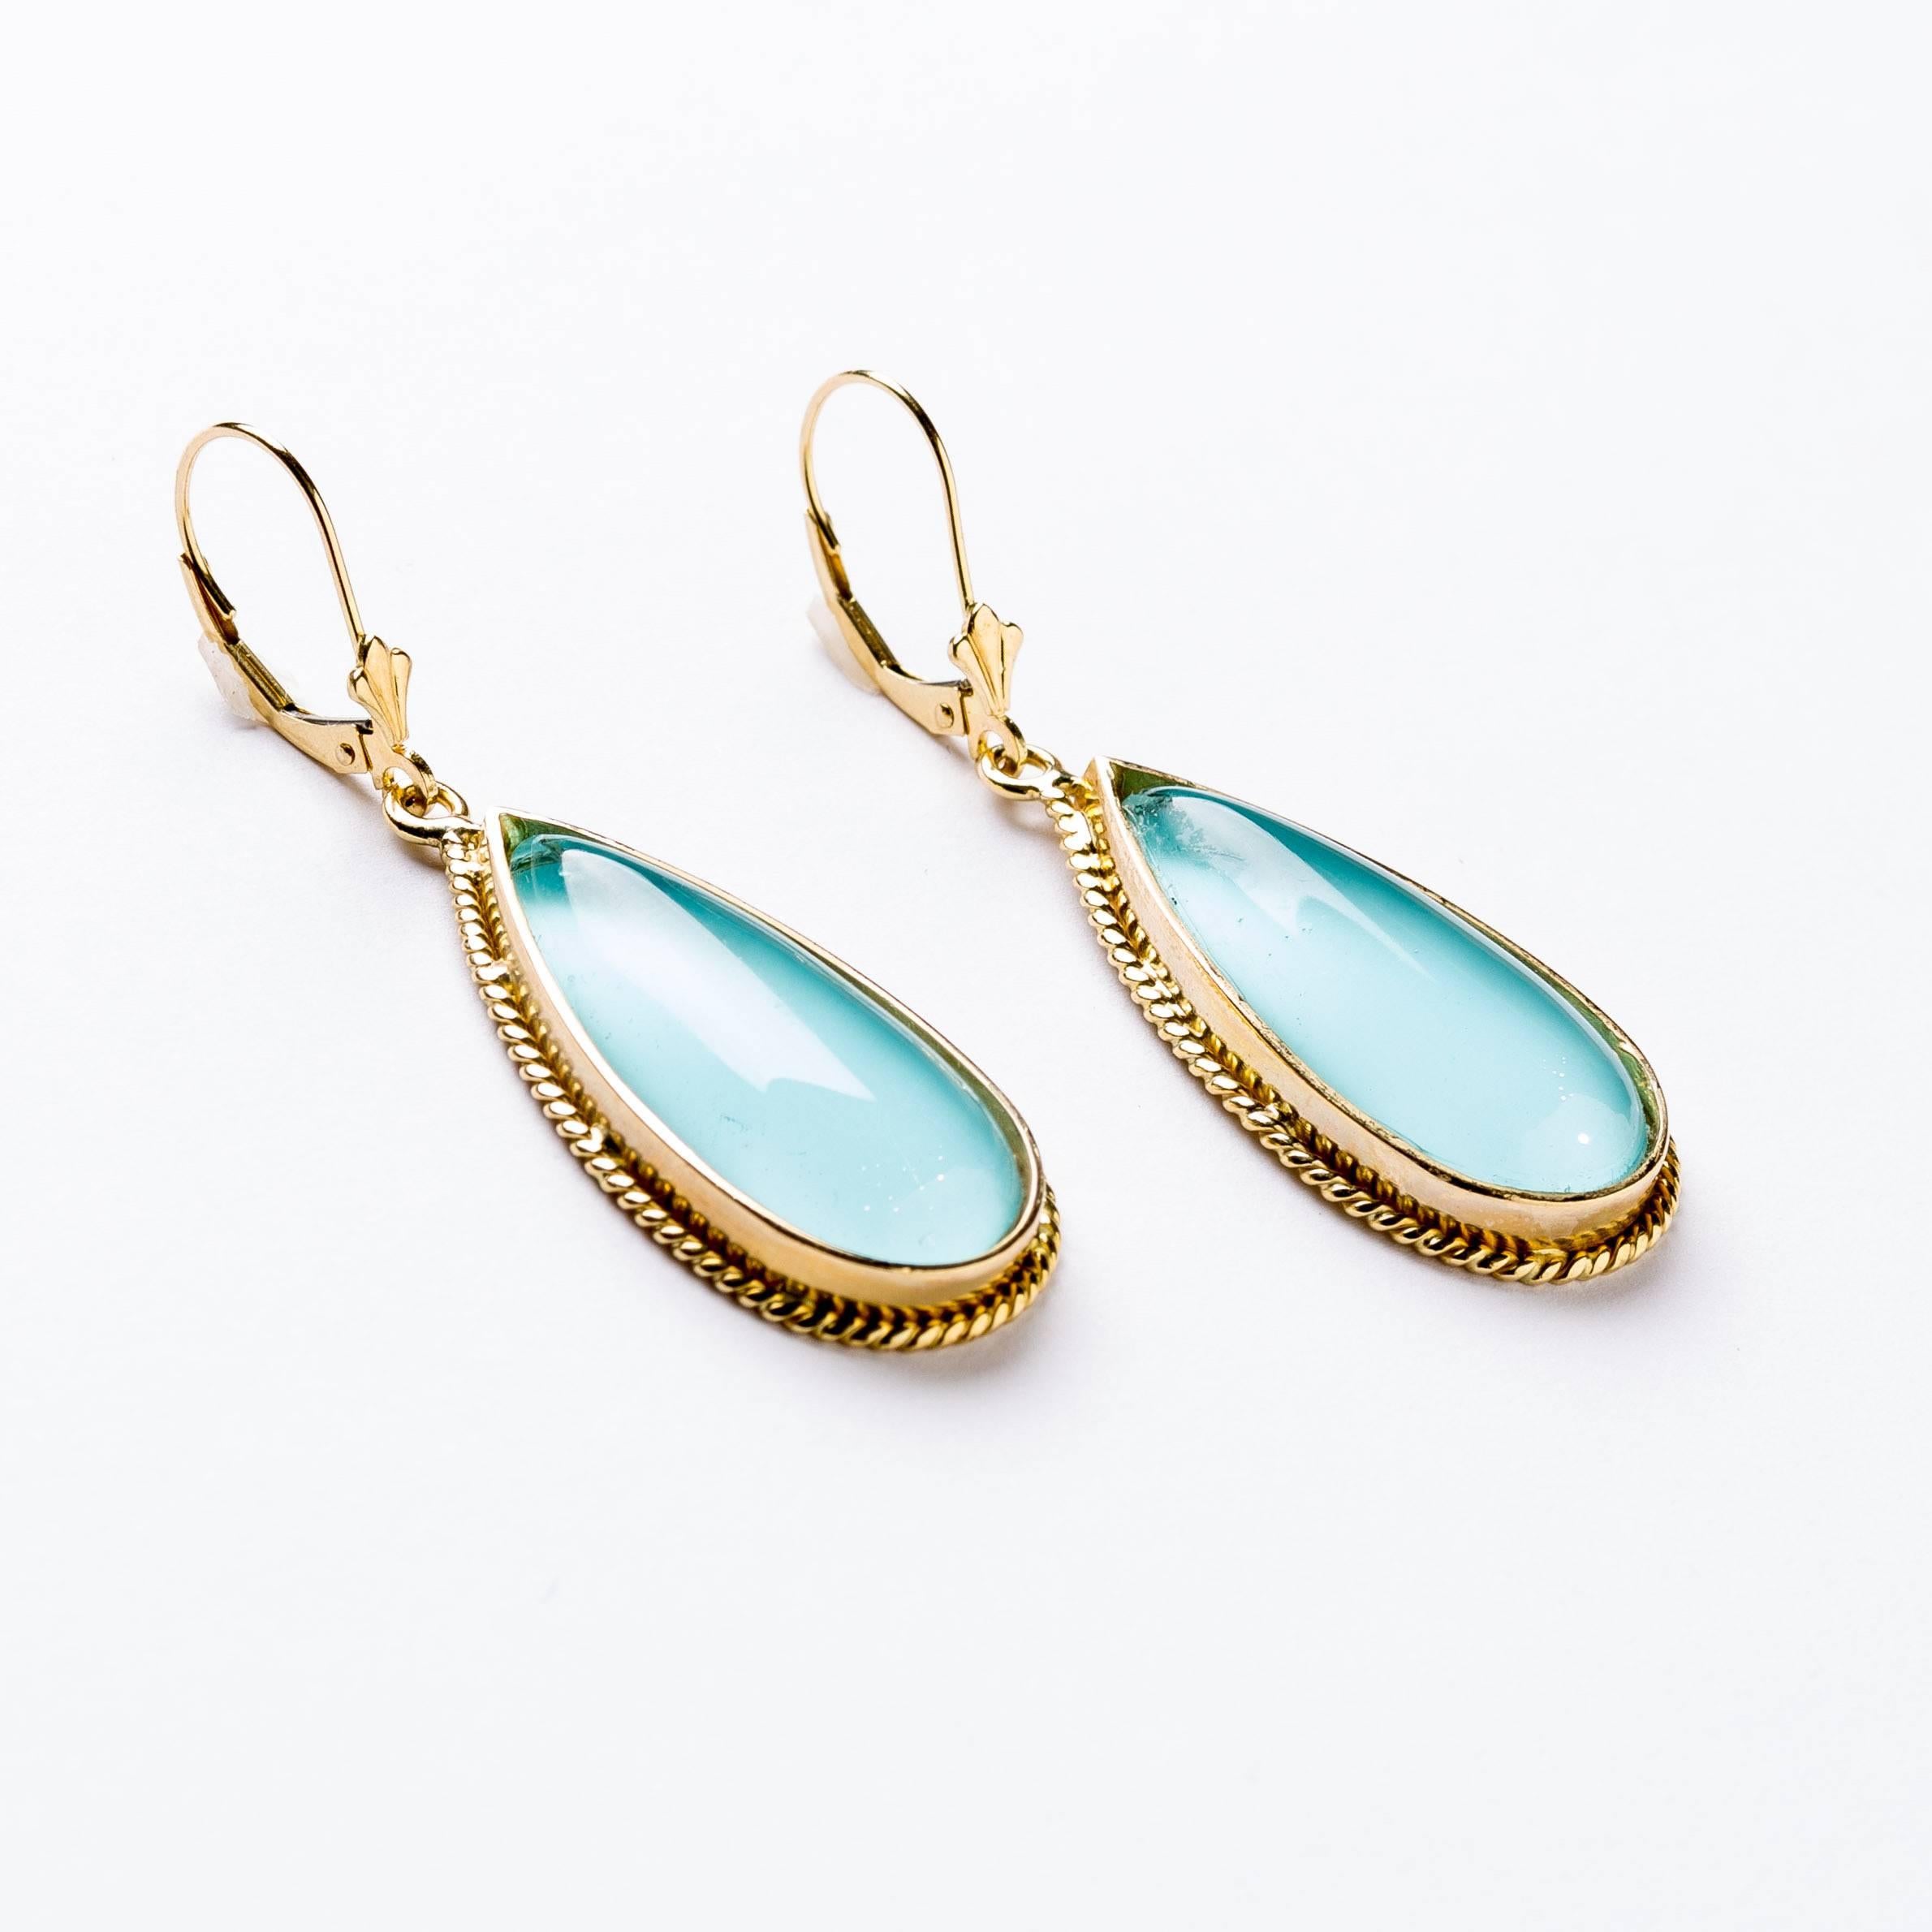 Beautiful doublets of turquoise and quartz crystal framed in 18 karat gold.